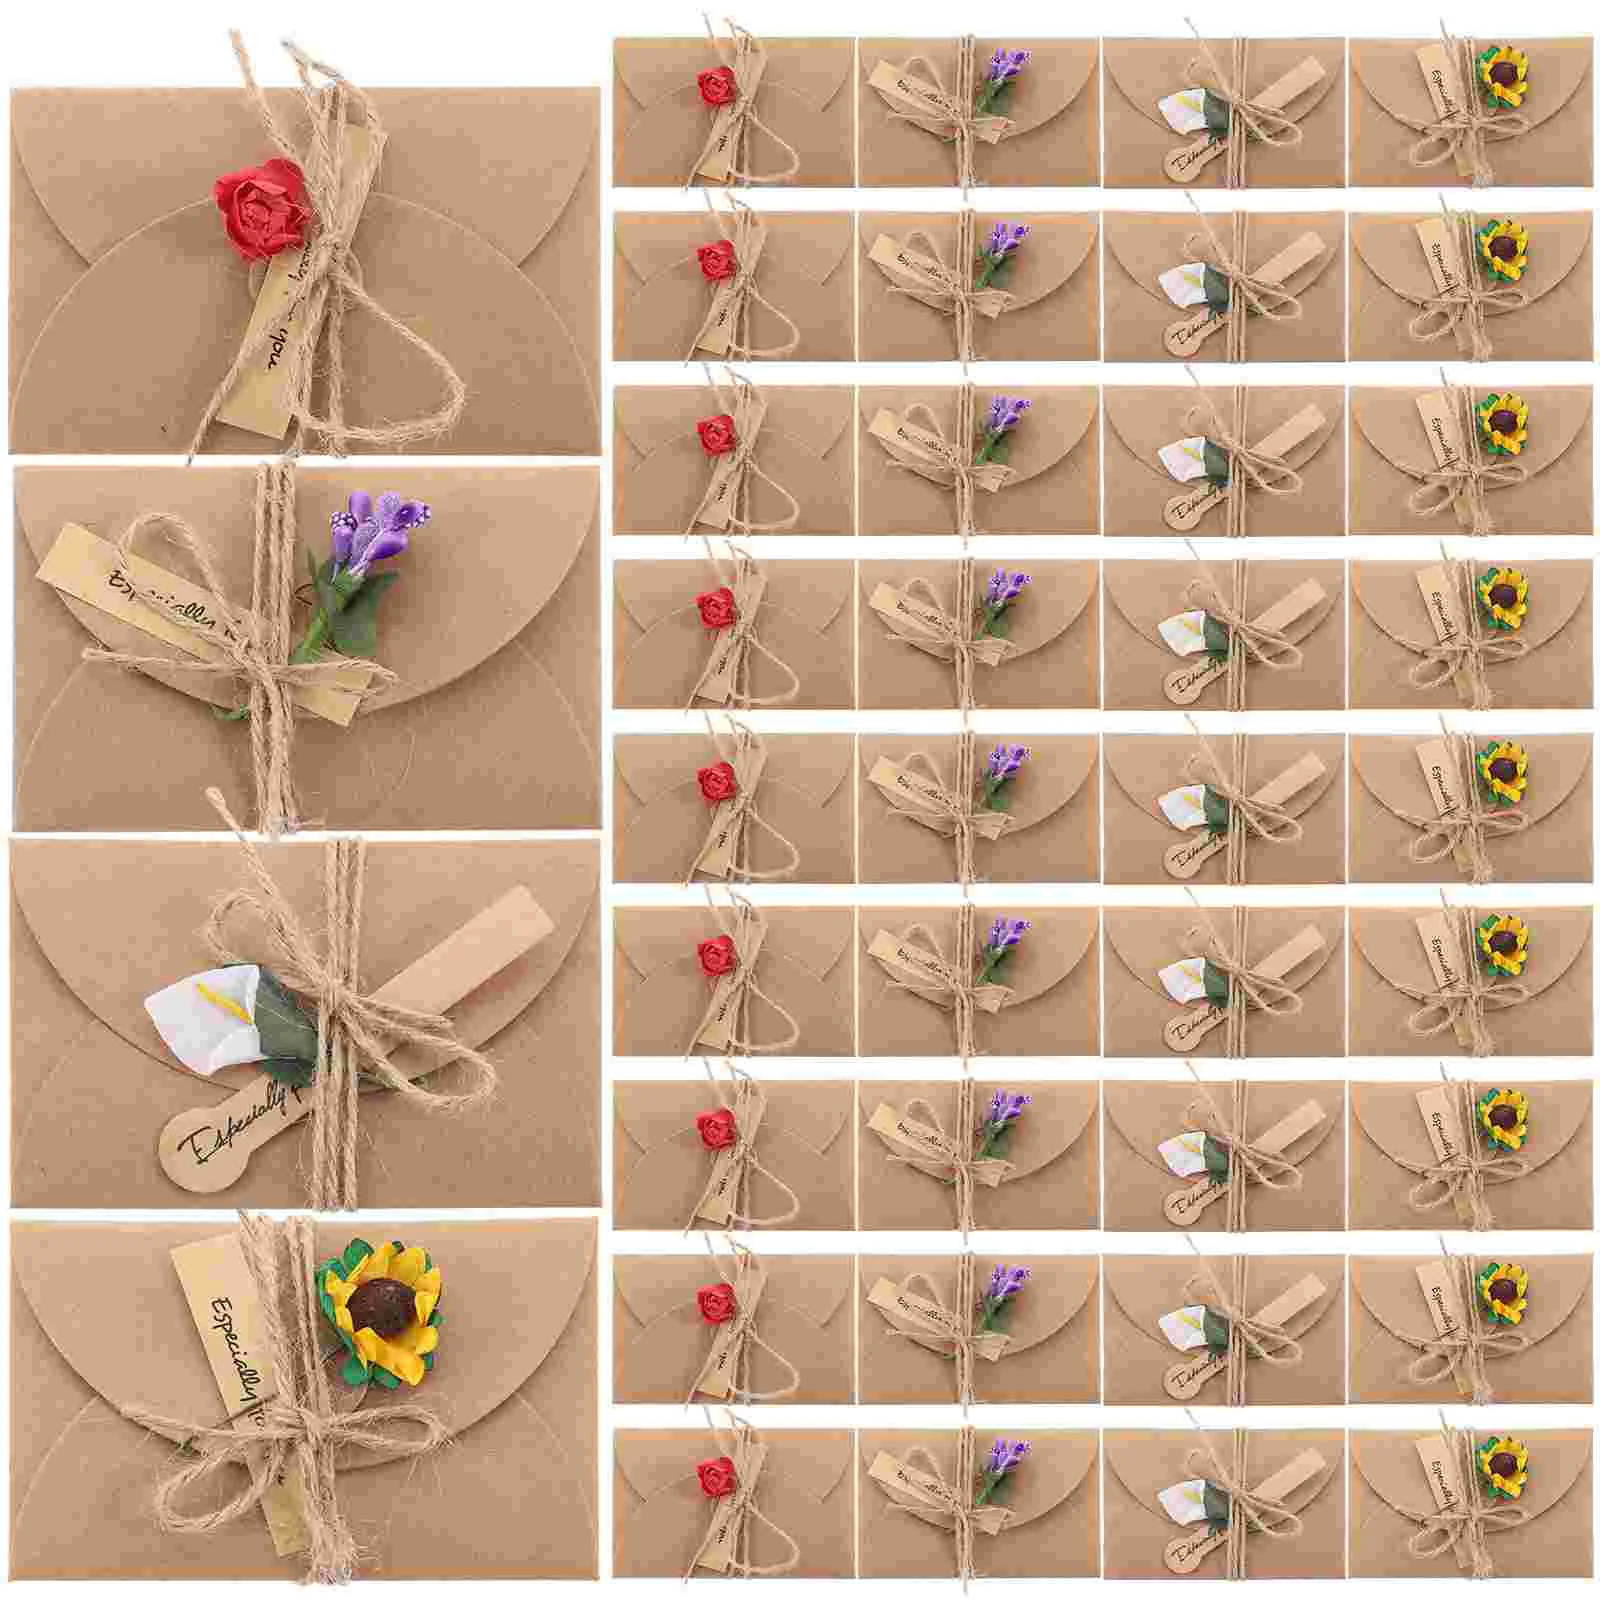 

40Pcs Faux Dried Flower Greeting Cards for Invitation Blessing Cards Paper Festival Gifts Party Supplies